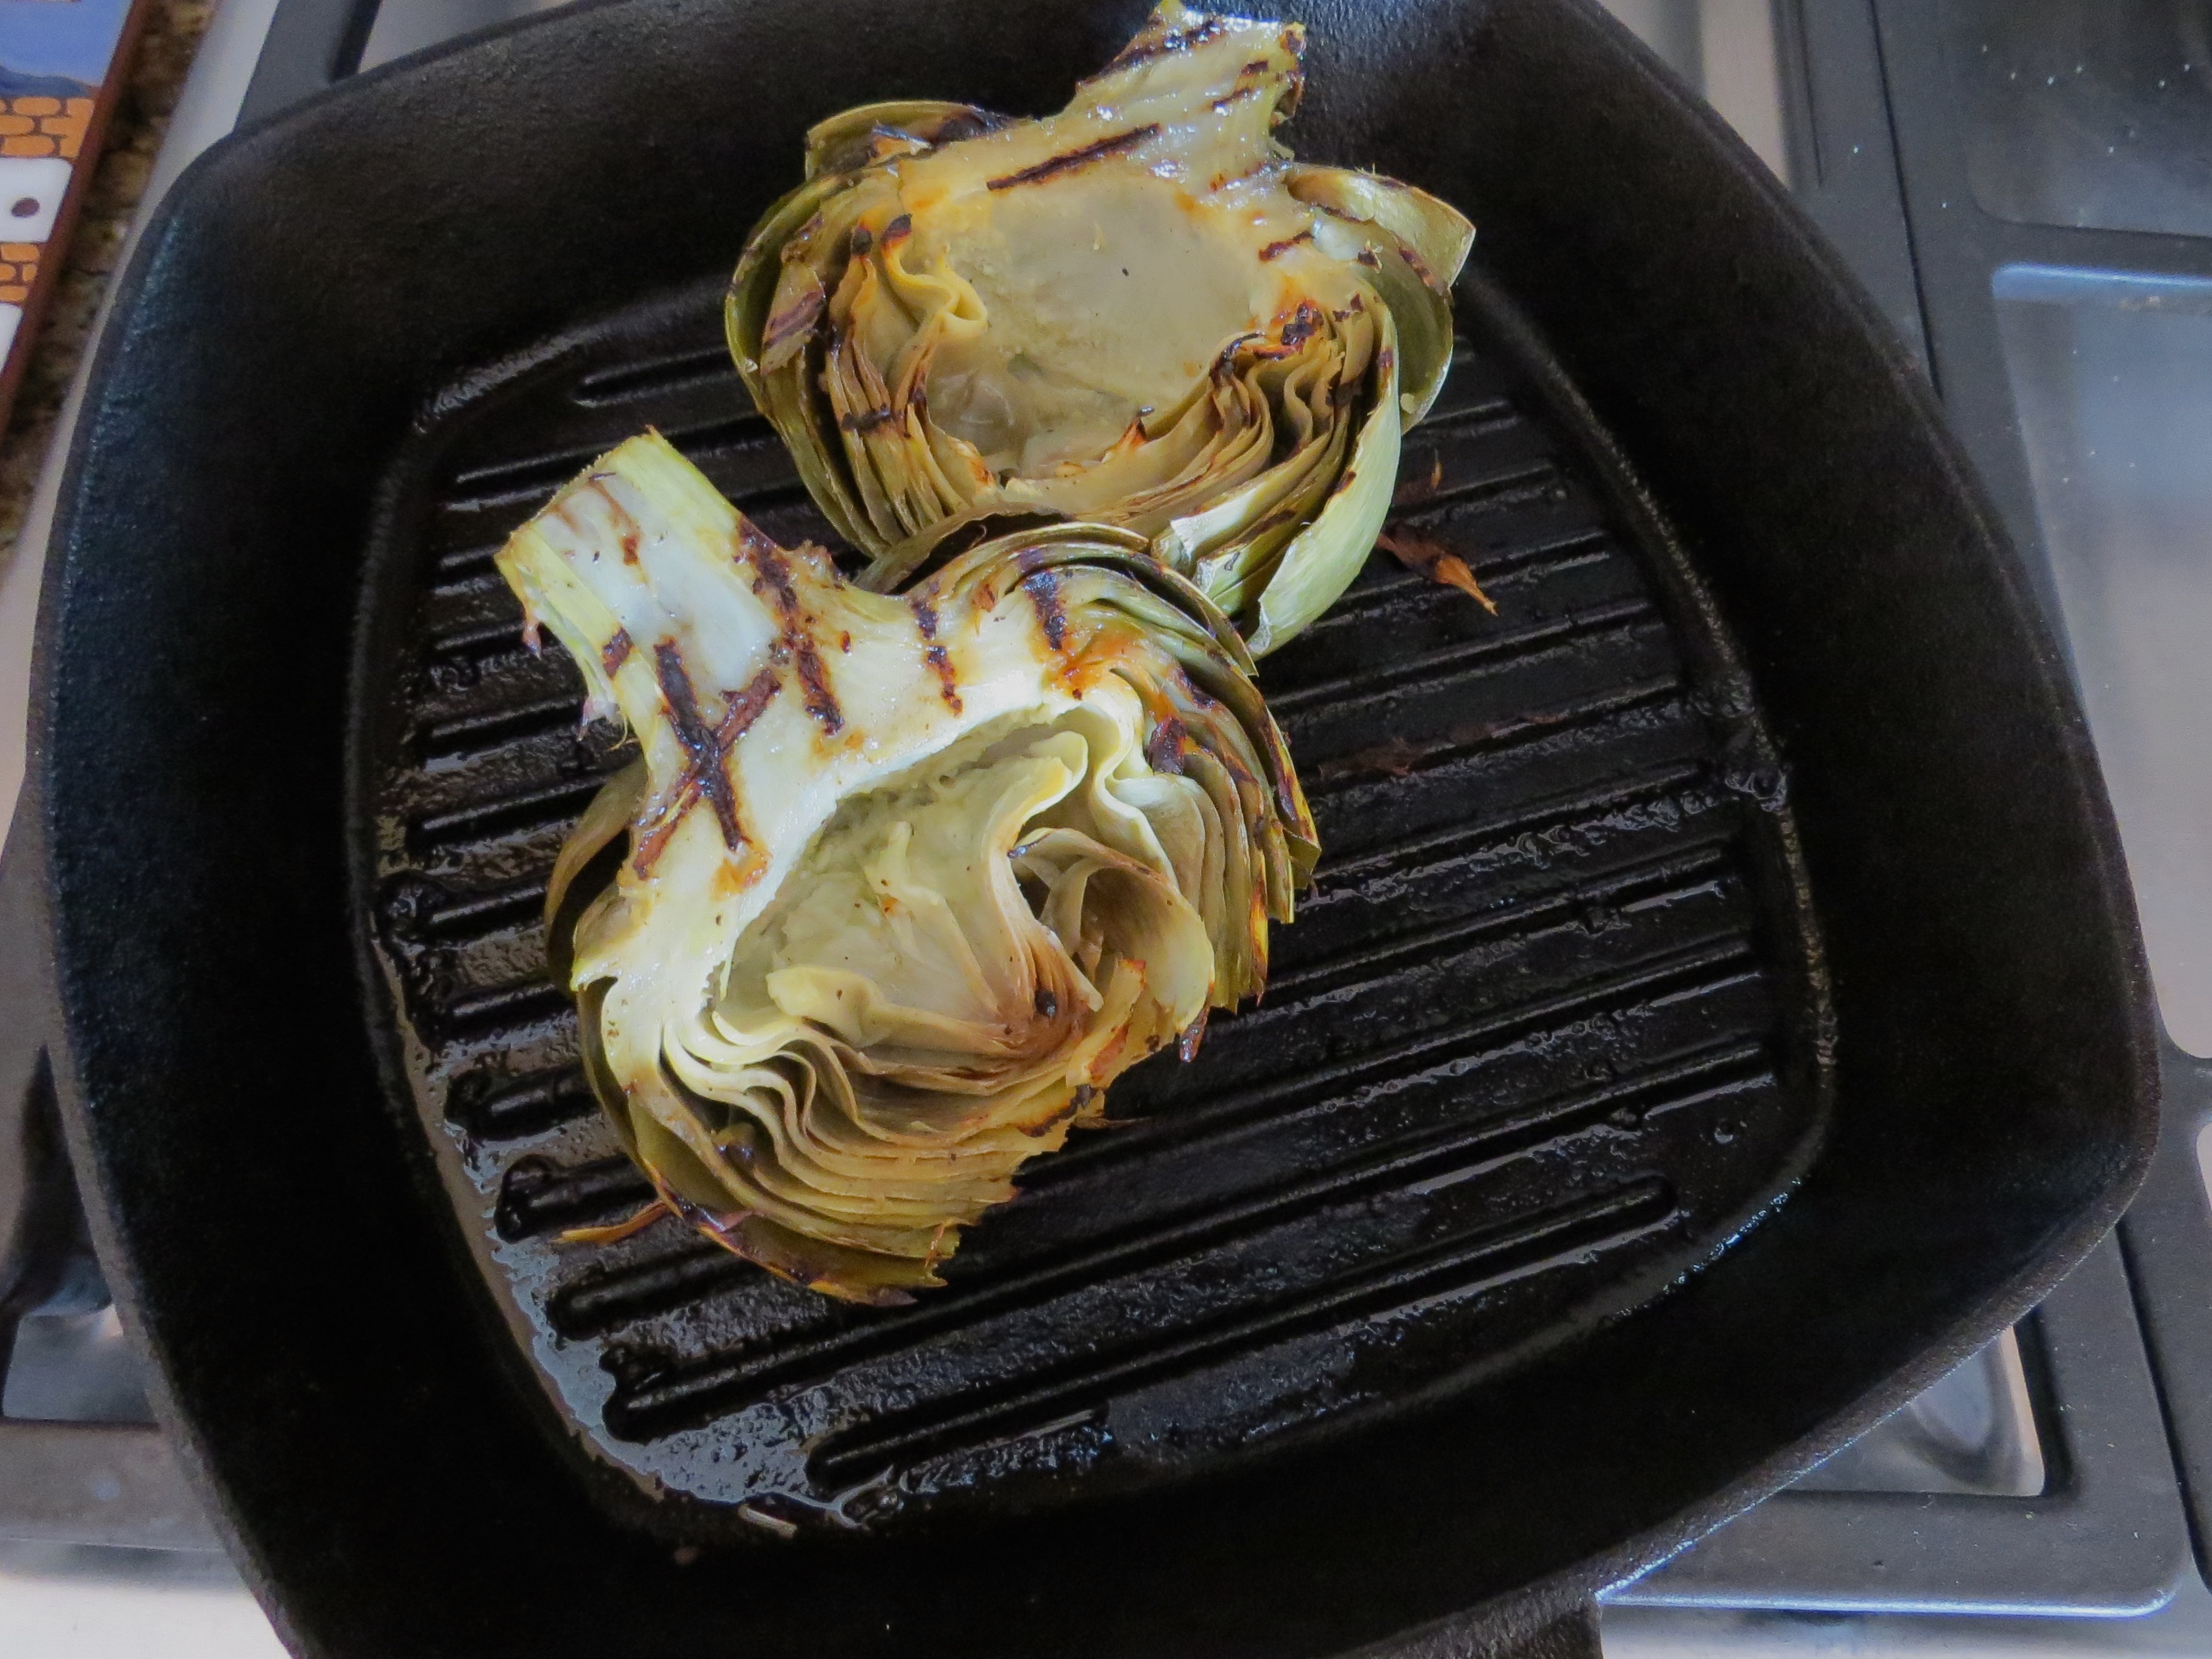 I mixed together 2 sliced garlic cloves, 1 Tbs, lemon juice, 1/2 tsp of salt and pepper and 2 TBS olive oil. After brushing the entire artichoke halves with the mix, I grilled them for 6 minutes, 3 minutes for each side. No condiments needed for serving...so good.